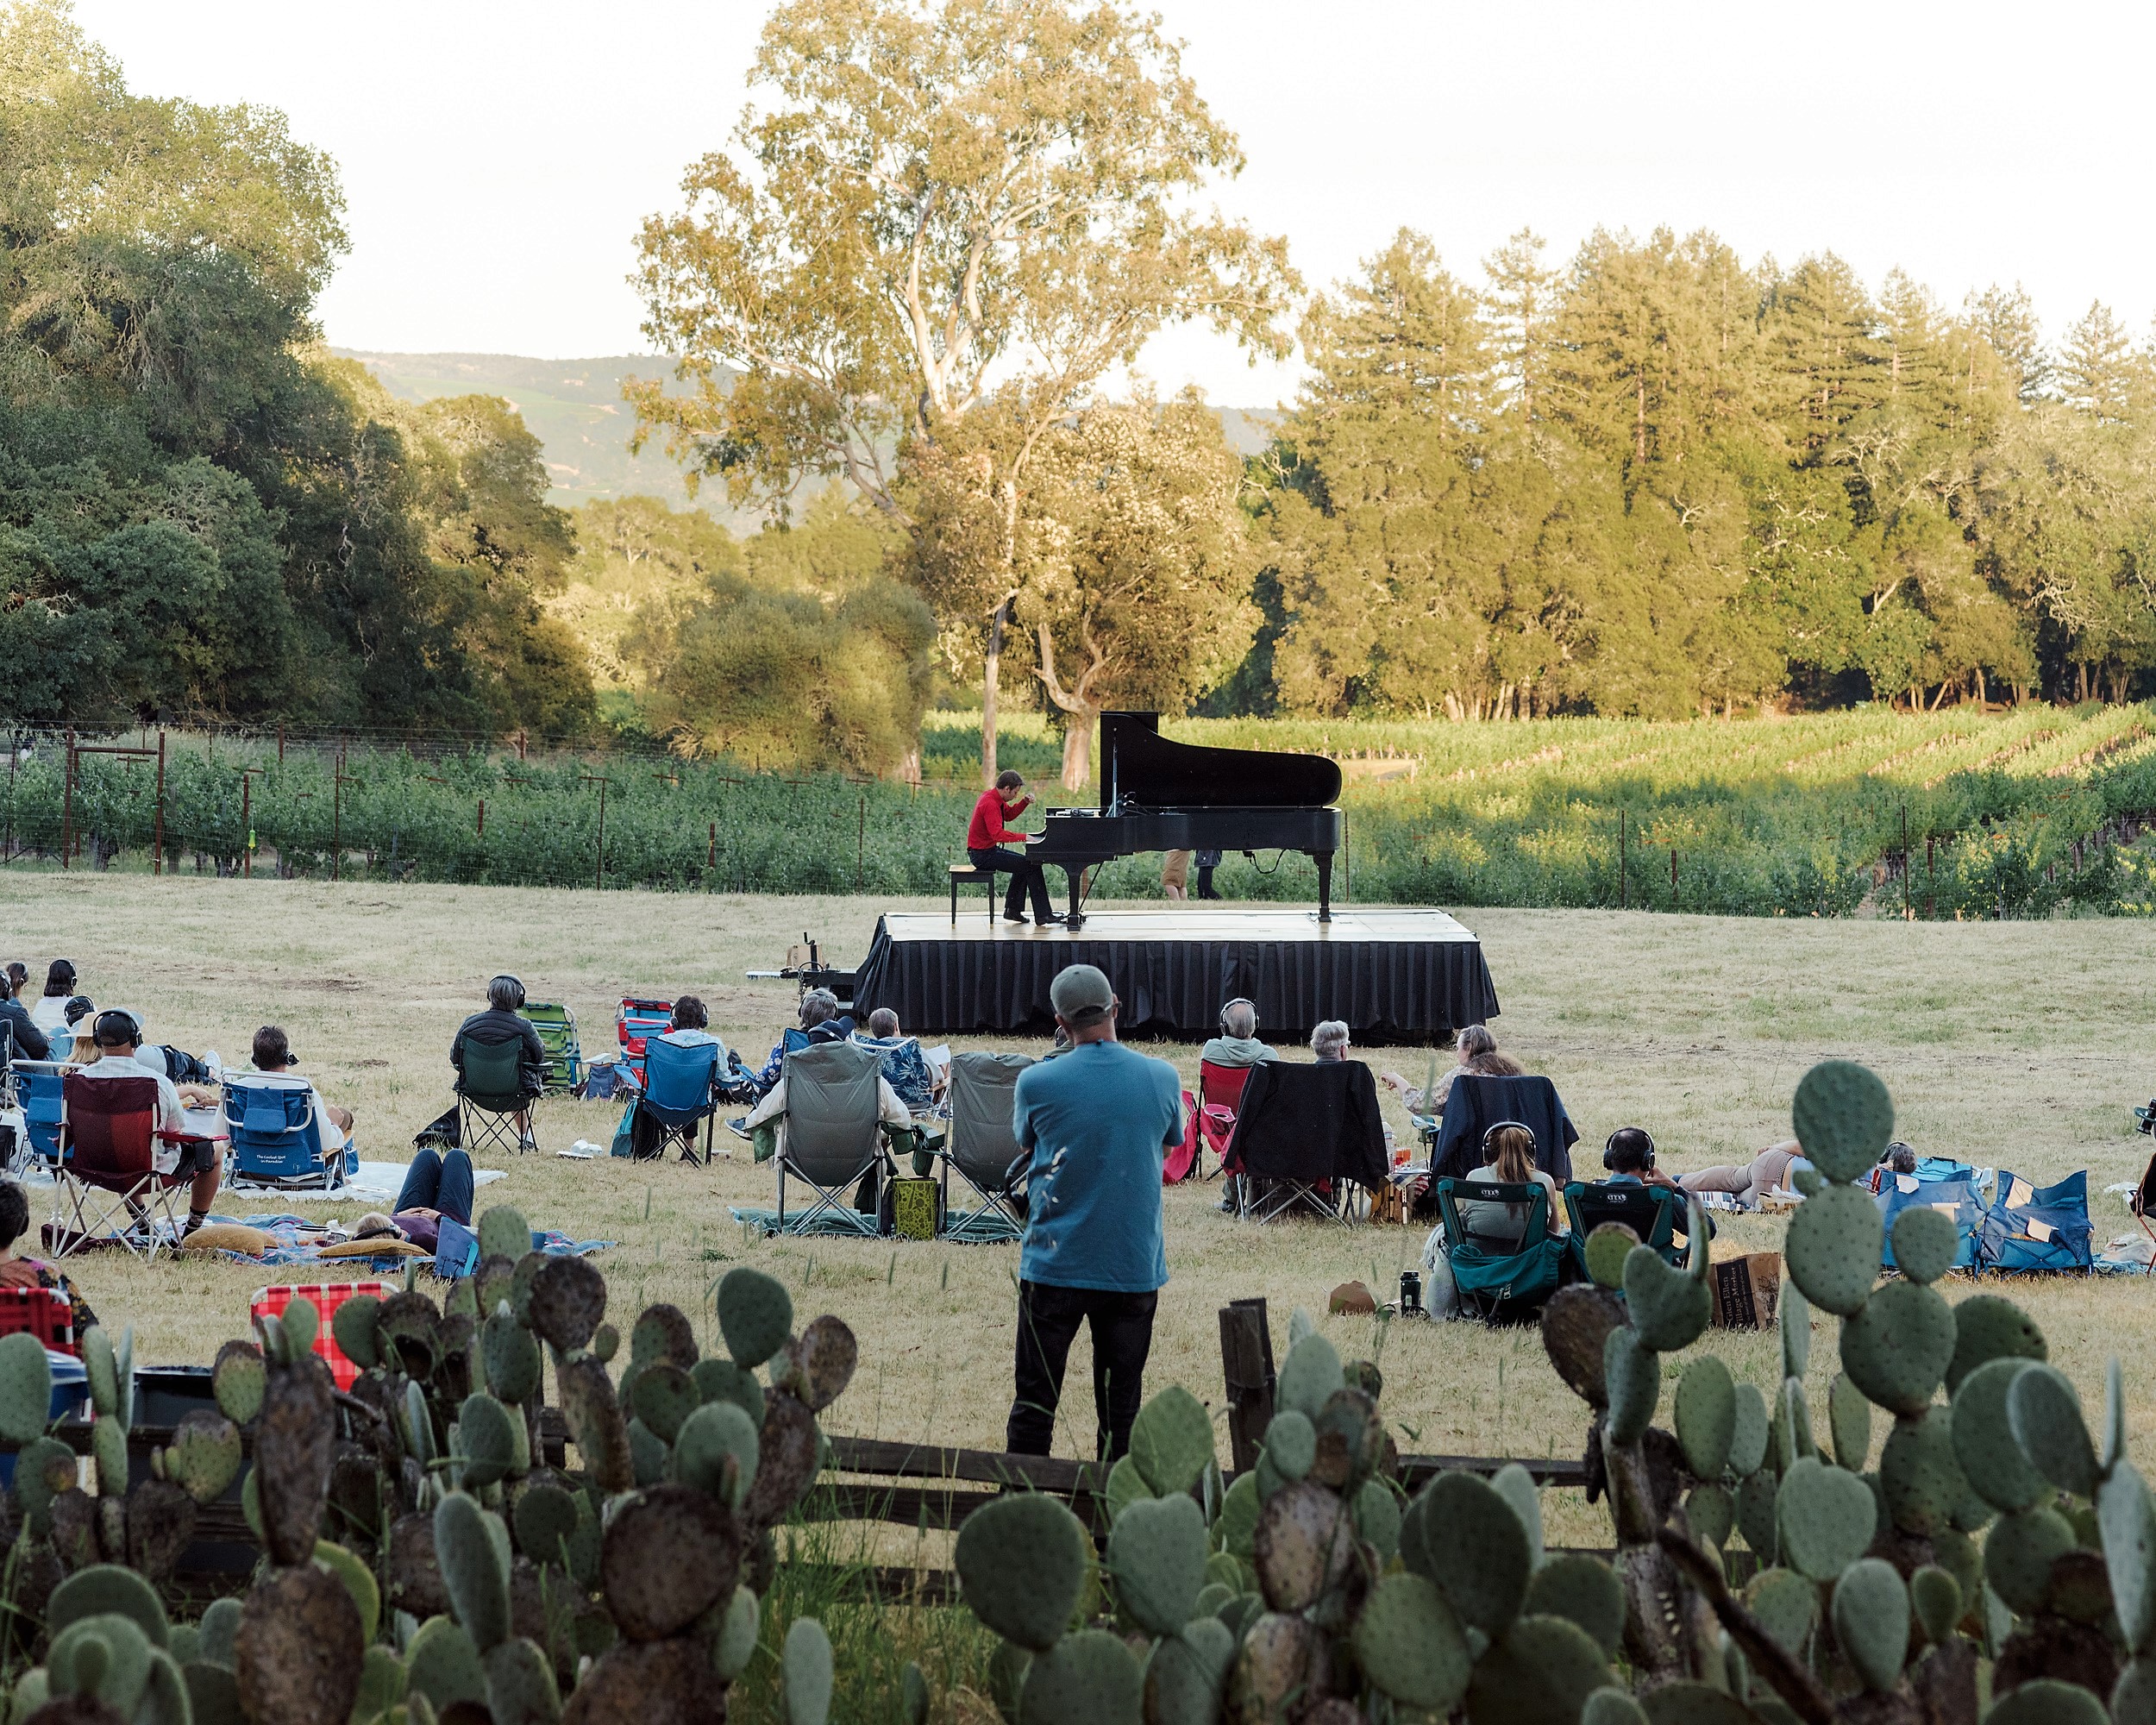 What is a Grand Piano Doing in This Sprawling Sonoma County Meadow?